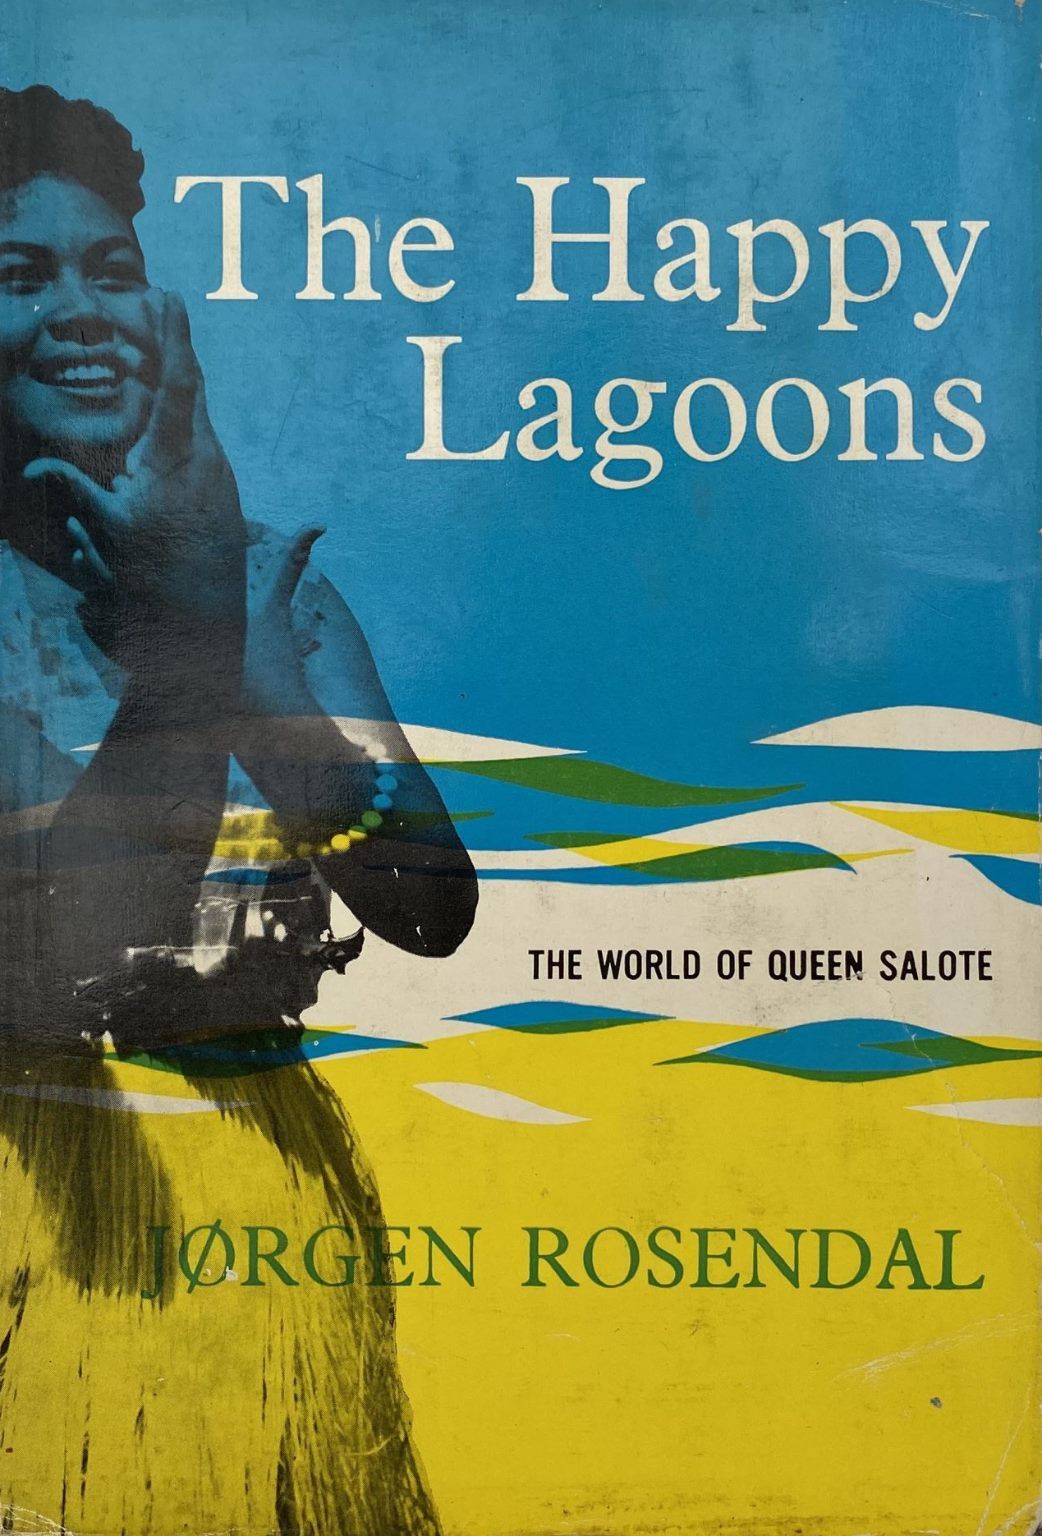 THE HAPPY LAGOONS: The World of Queen Salote